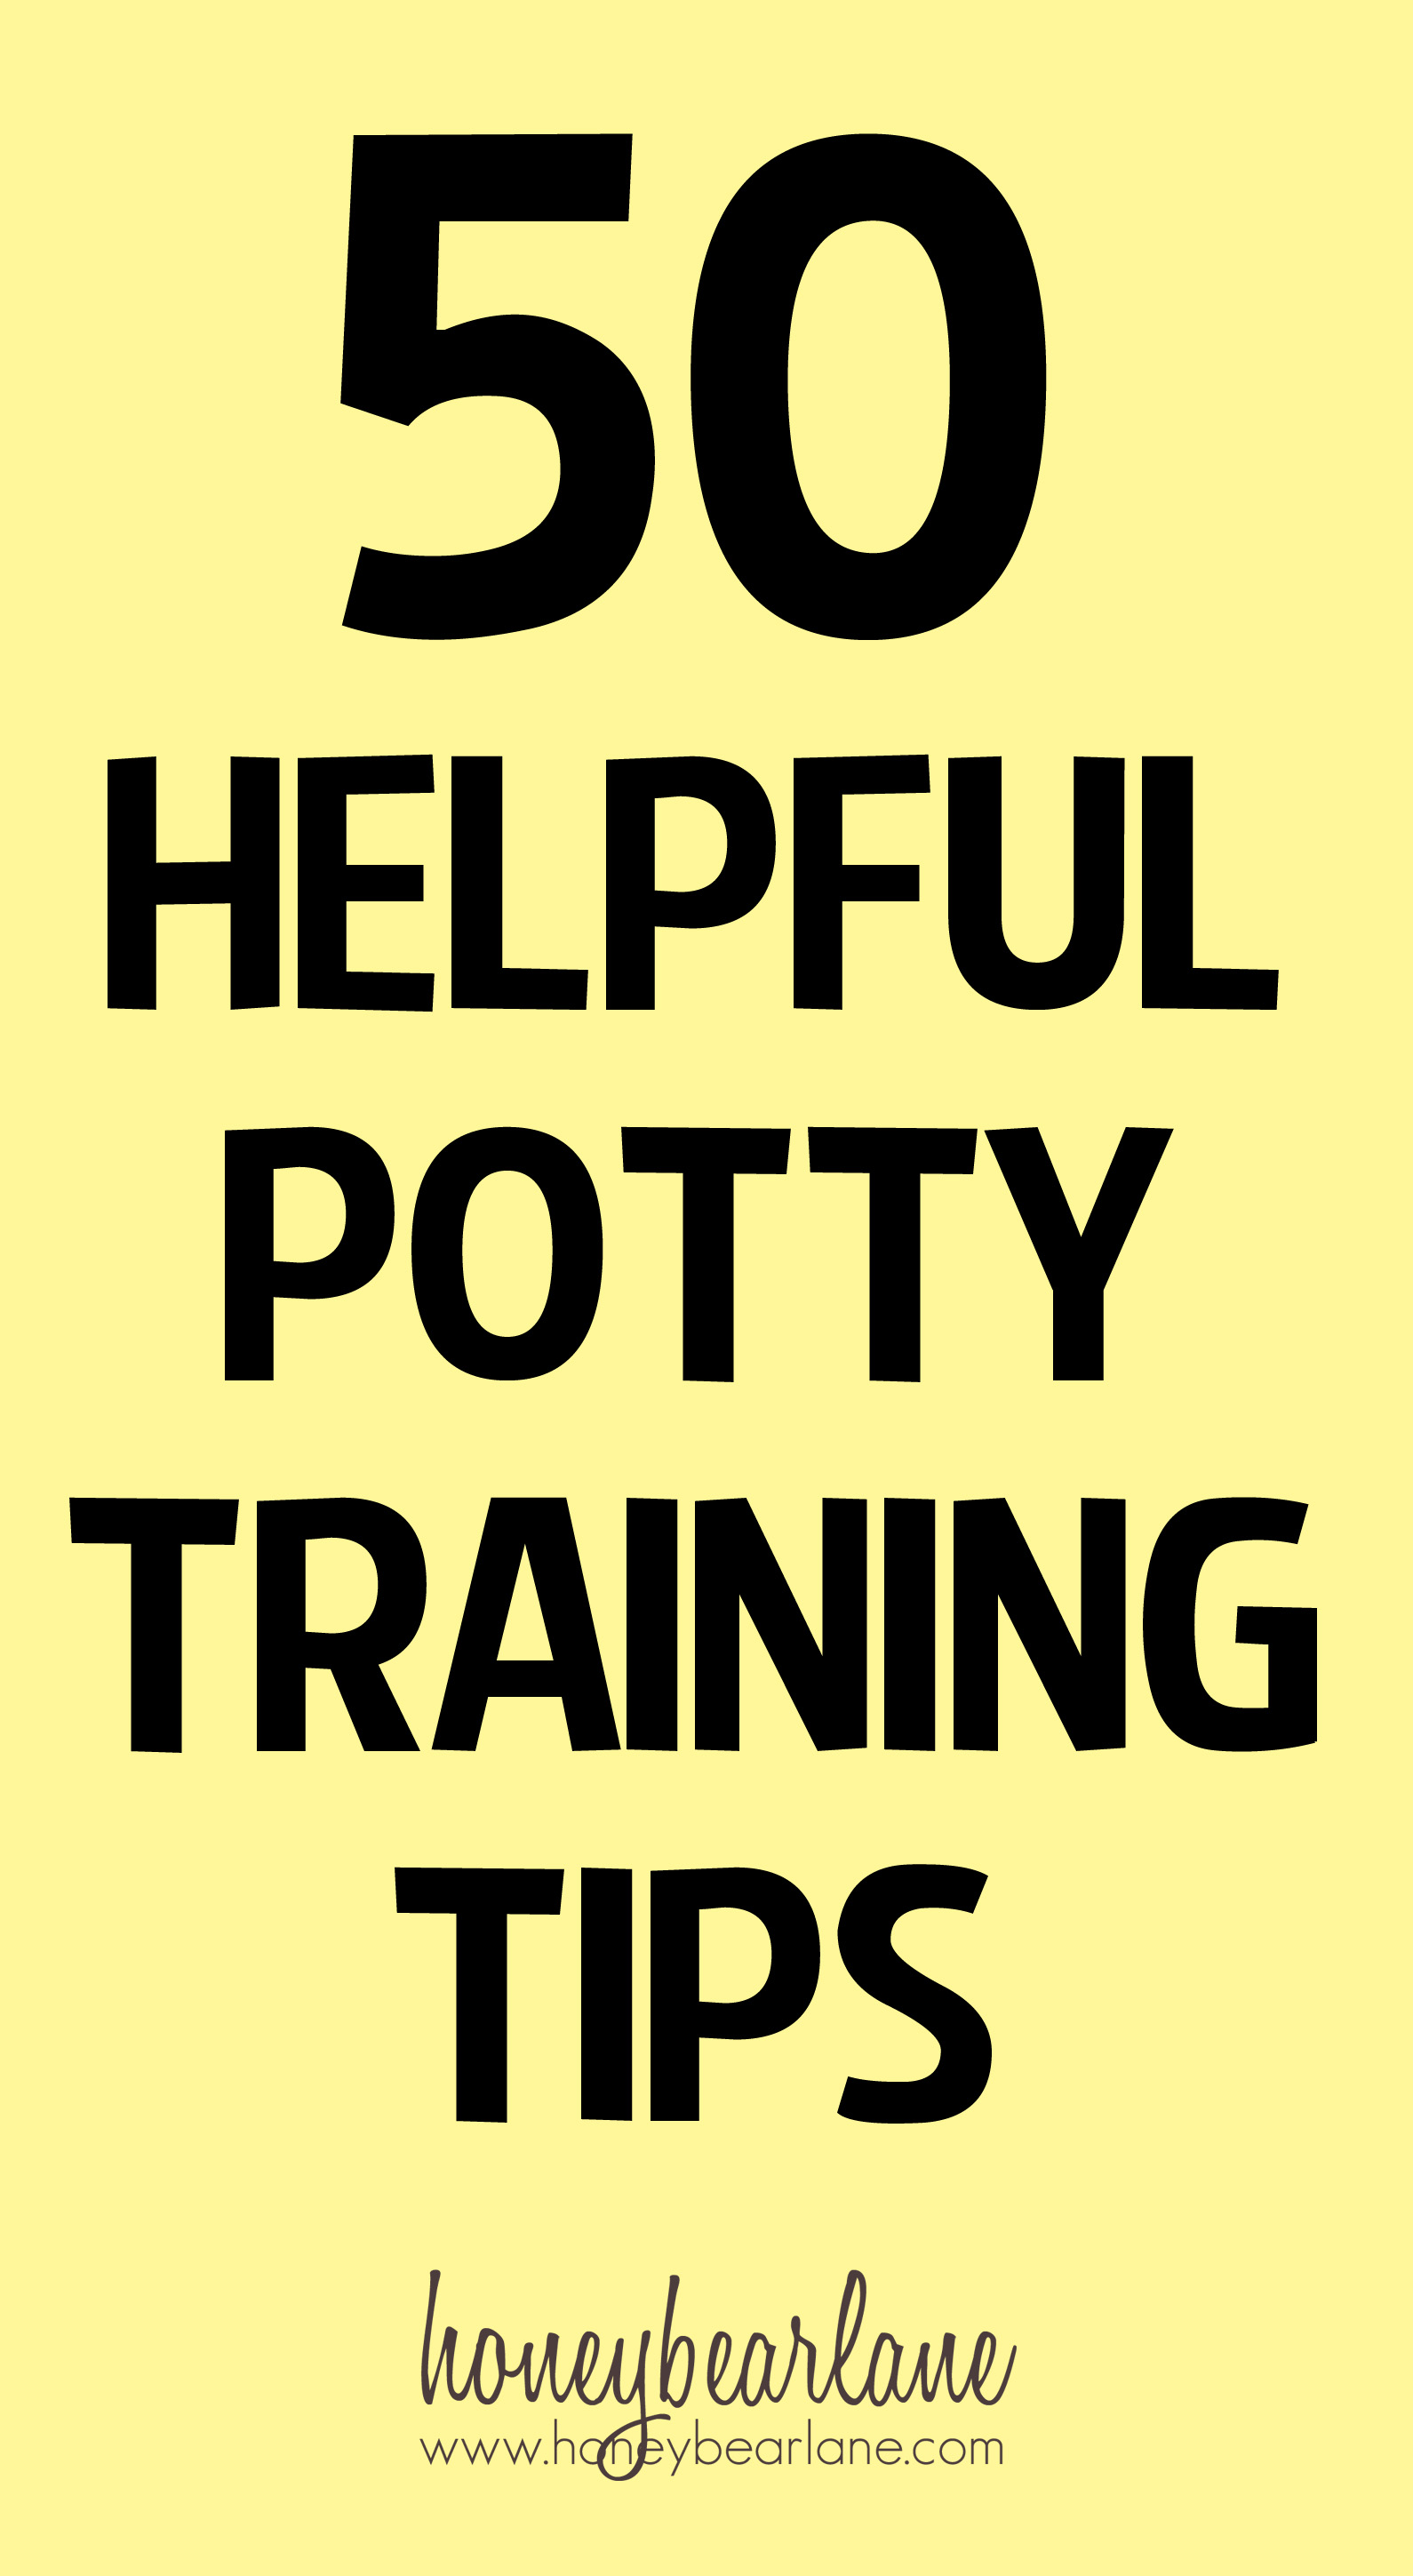 Top Tips For Night Time Potty-Training - Someone's Mum